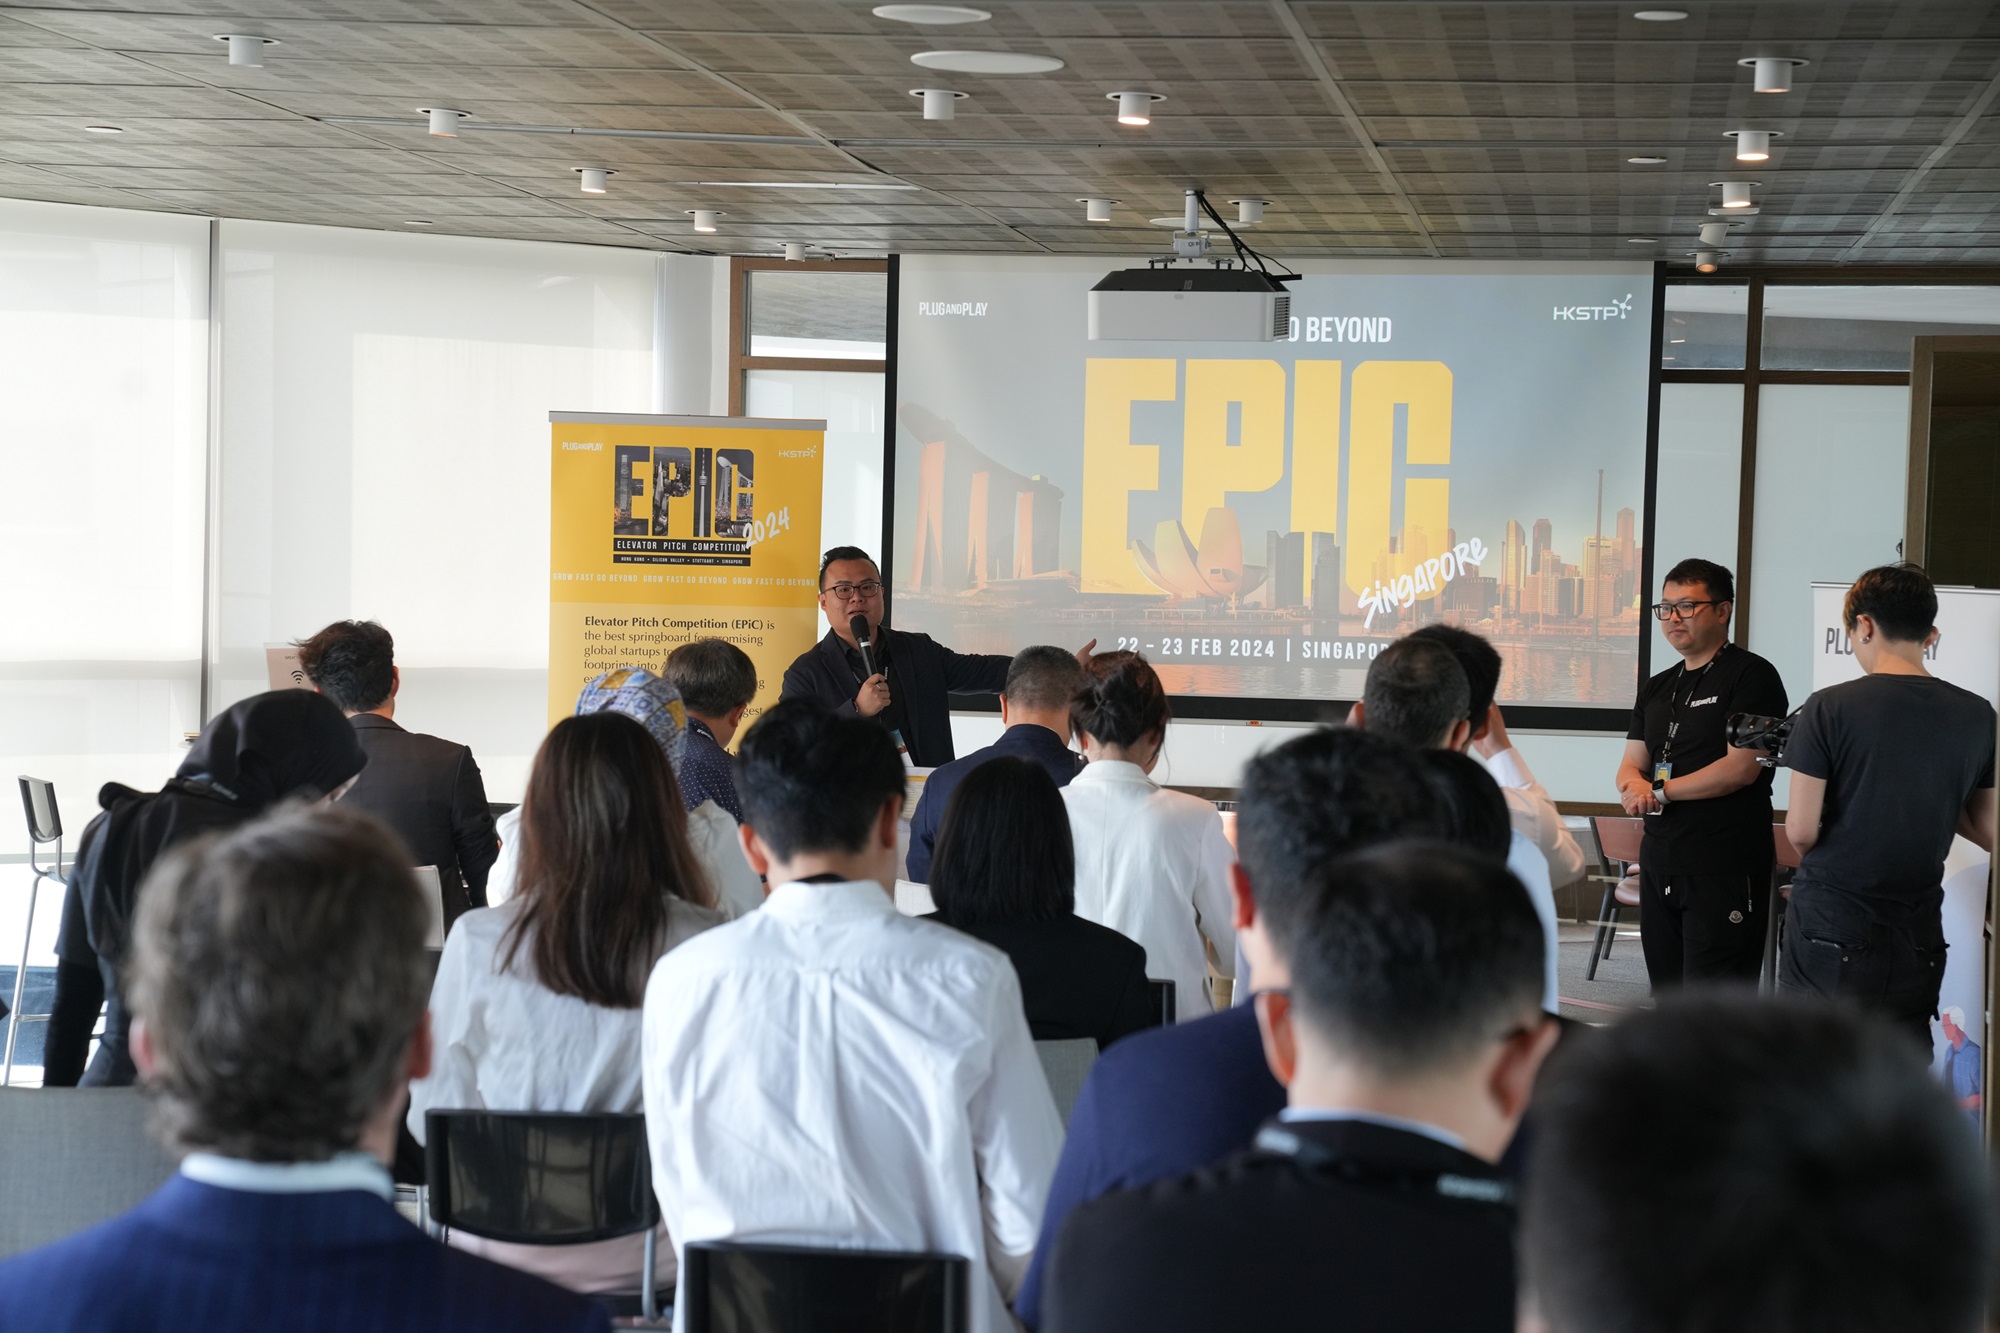 Photo 1: HKSTP successfully completed the first-ever Asia Pacific Elevator Pitch Competition 2024 (EPiC) Region Semi-Final on 22 and 23 February 2024, with 20 of the Singapore’s brightest innovators selected to fly to Hong Kong on 26 April 2024 for the EPiC 2024 Grand Finale.